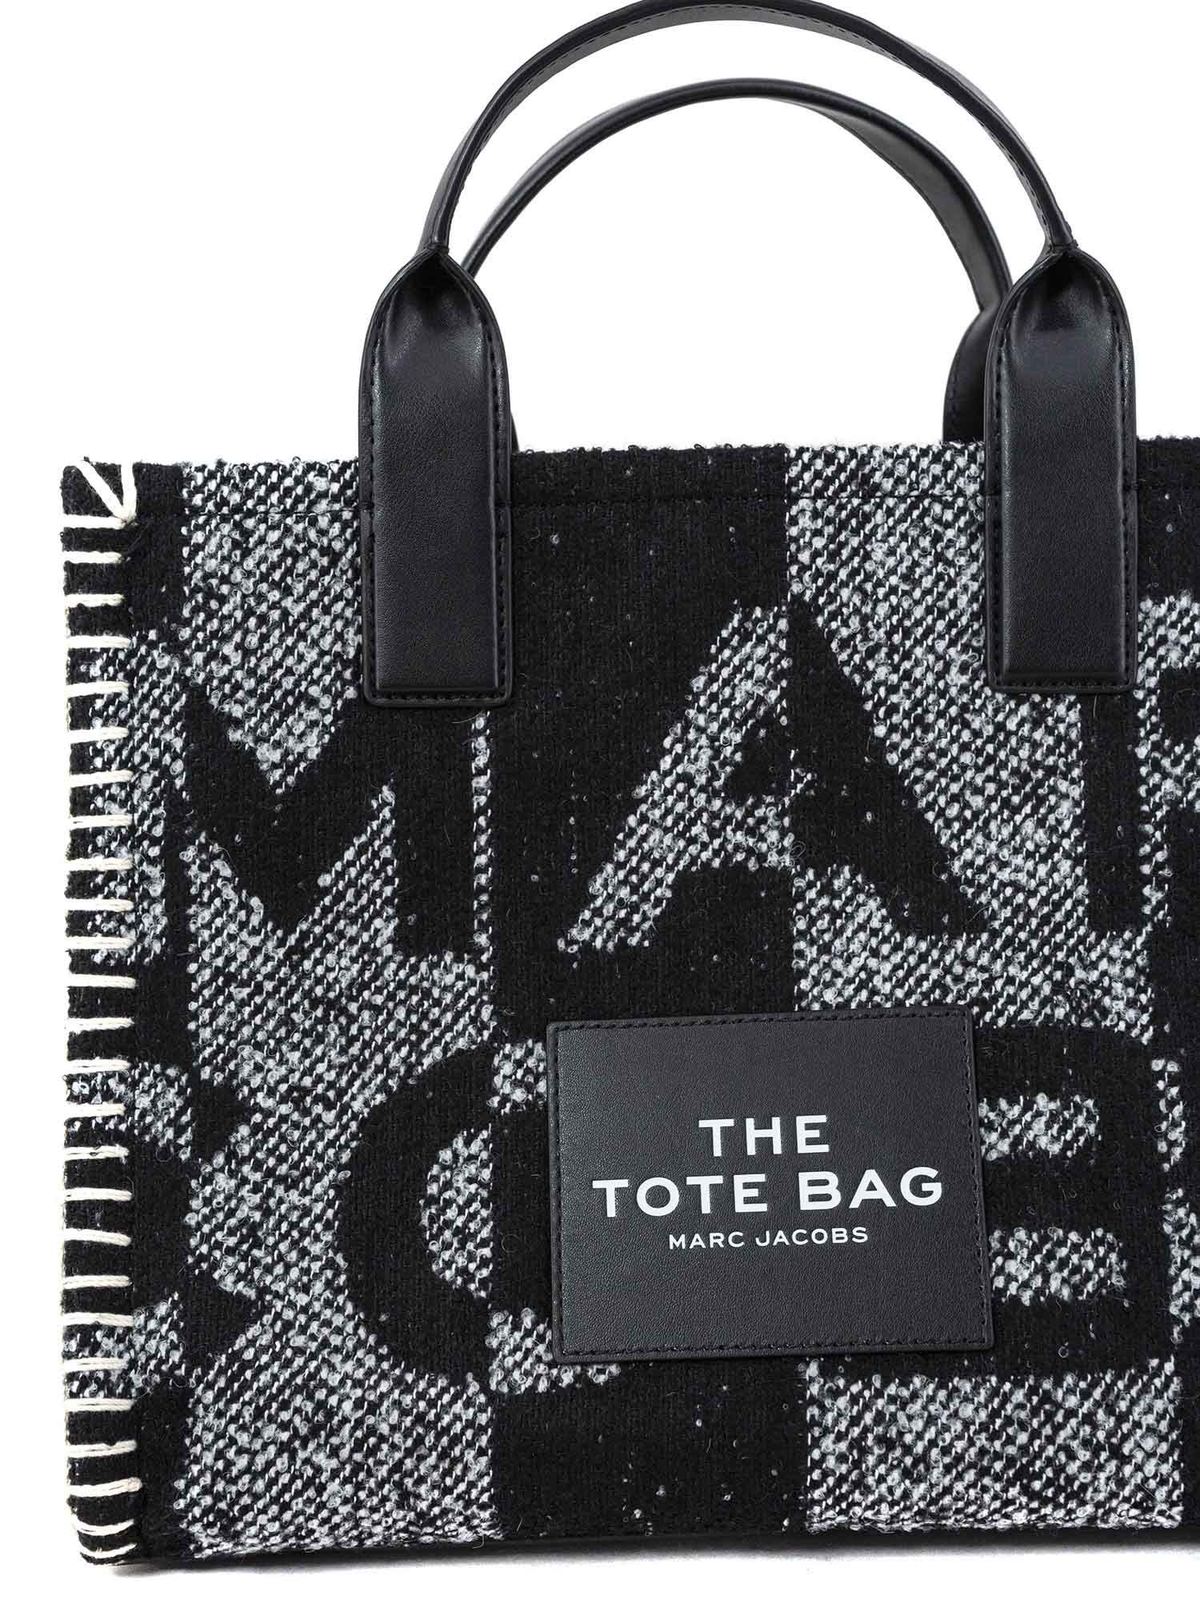 Totes bags Marc Jacobs - The Blanket Traveller bag in black and